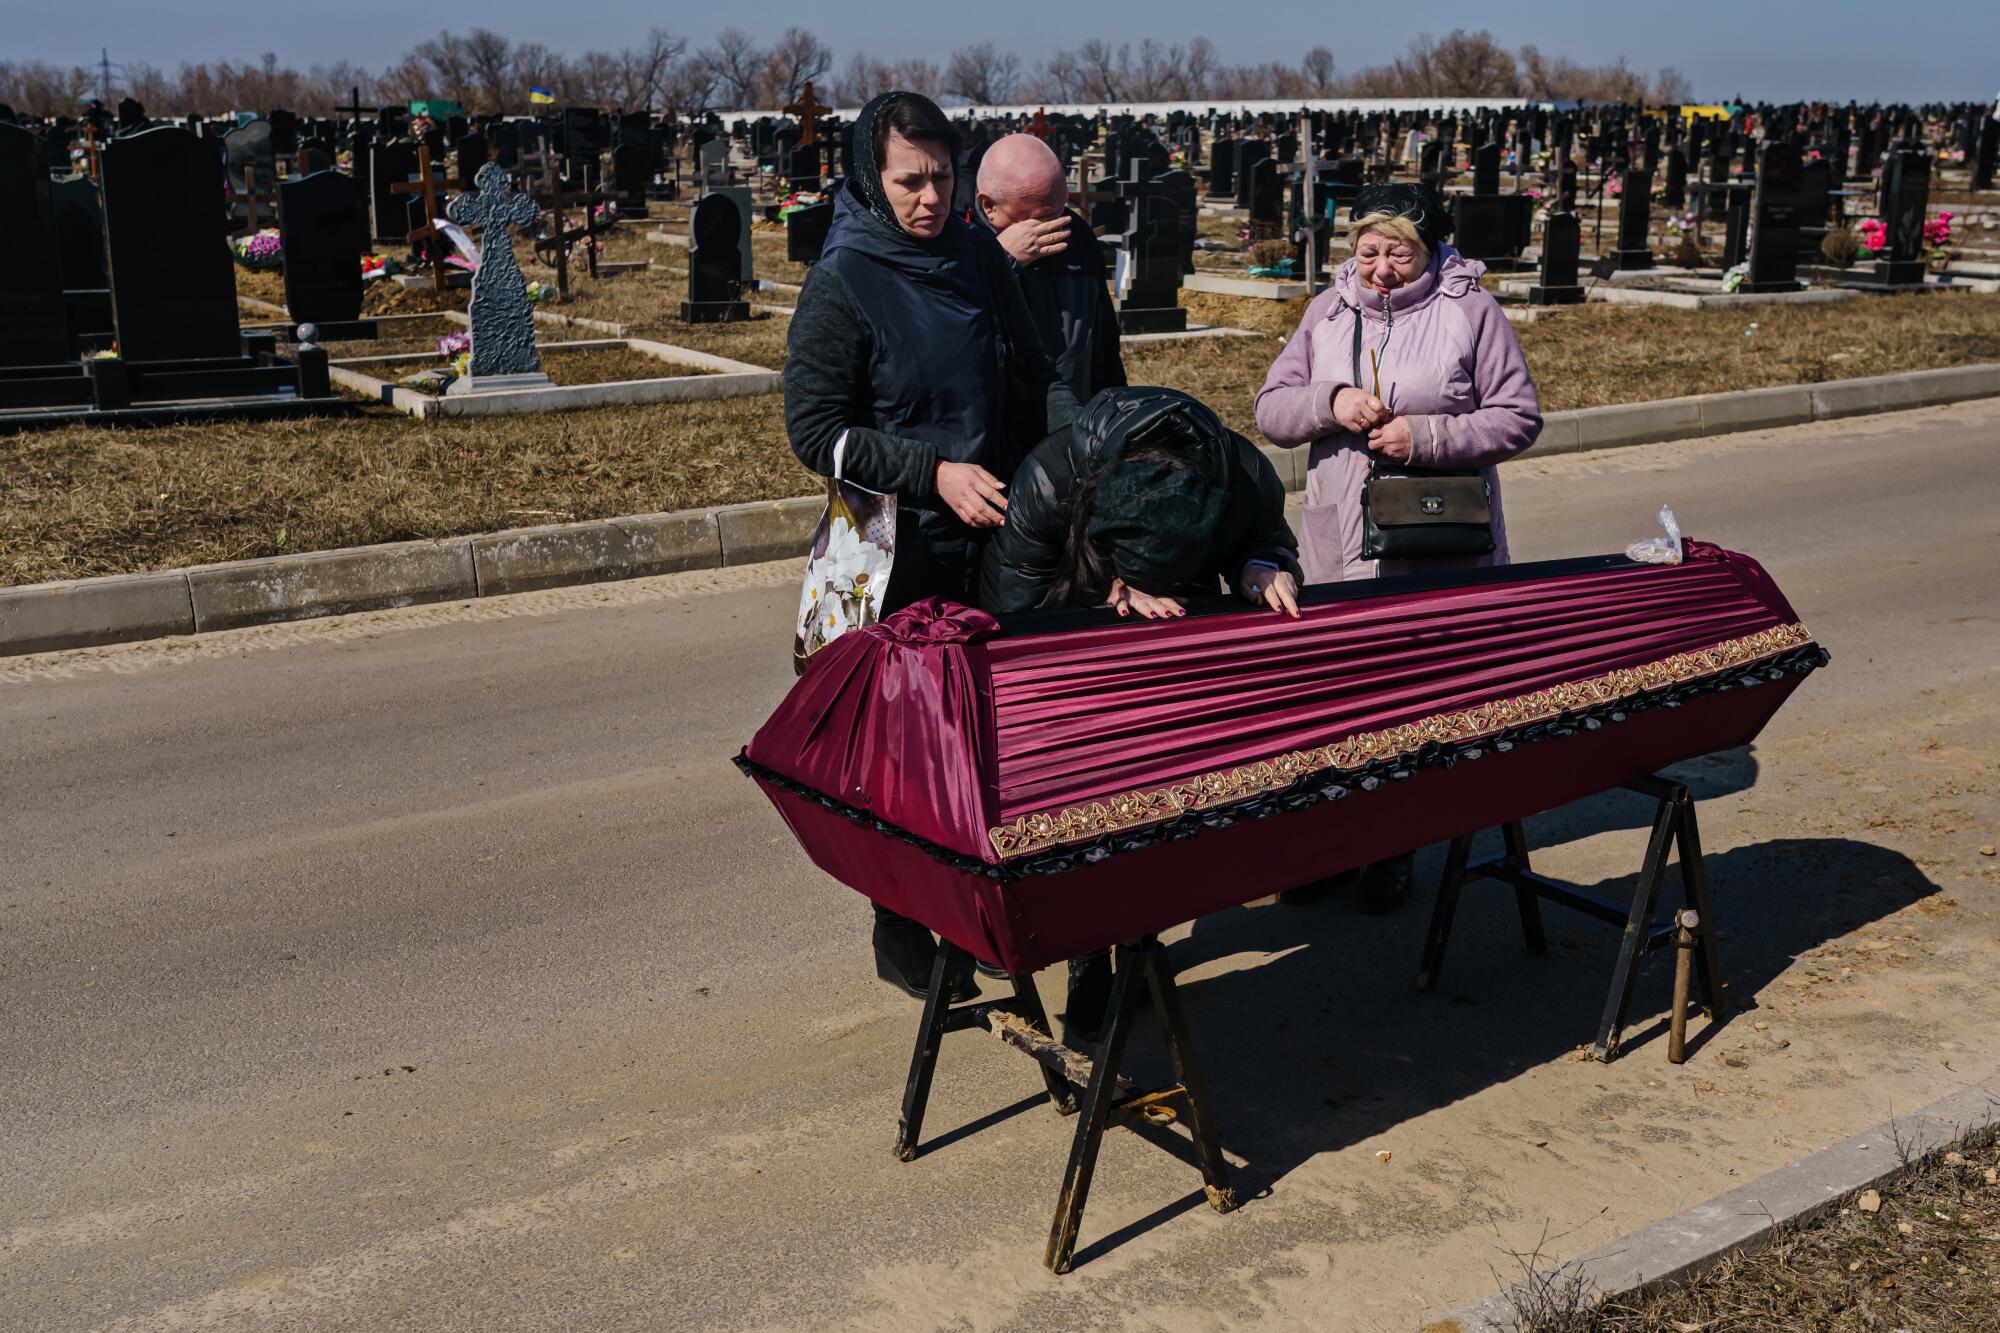 A mourner resting her head and hands on a casket on a stand near headstones as three others stand by, one wiping away tears.